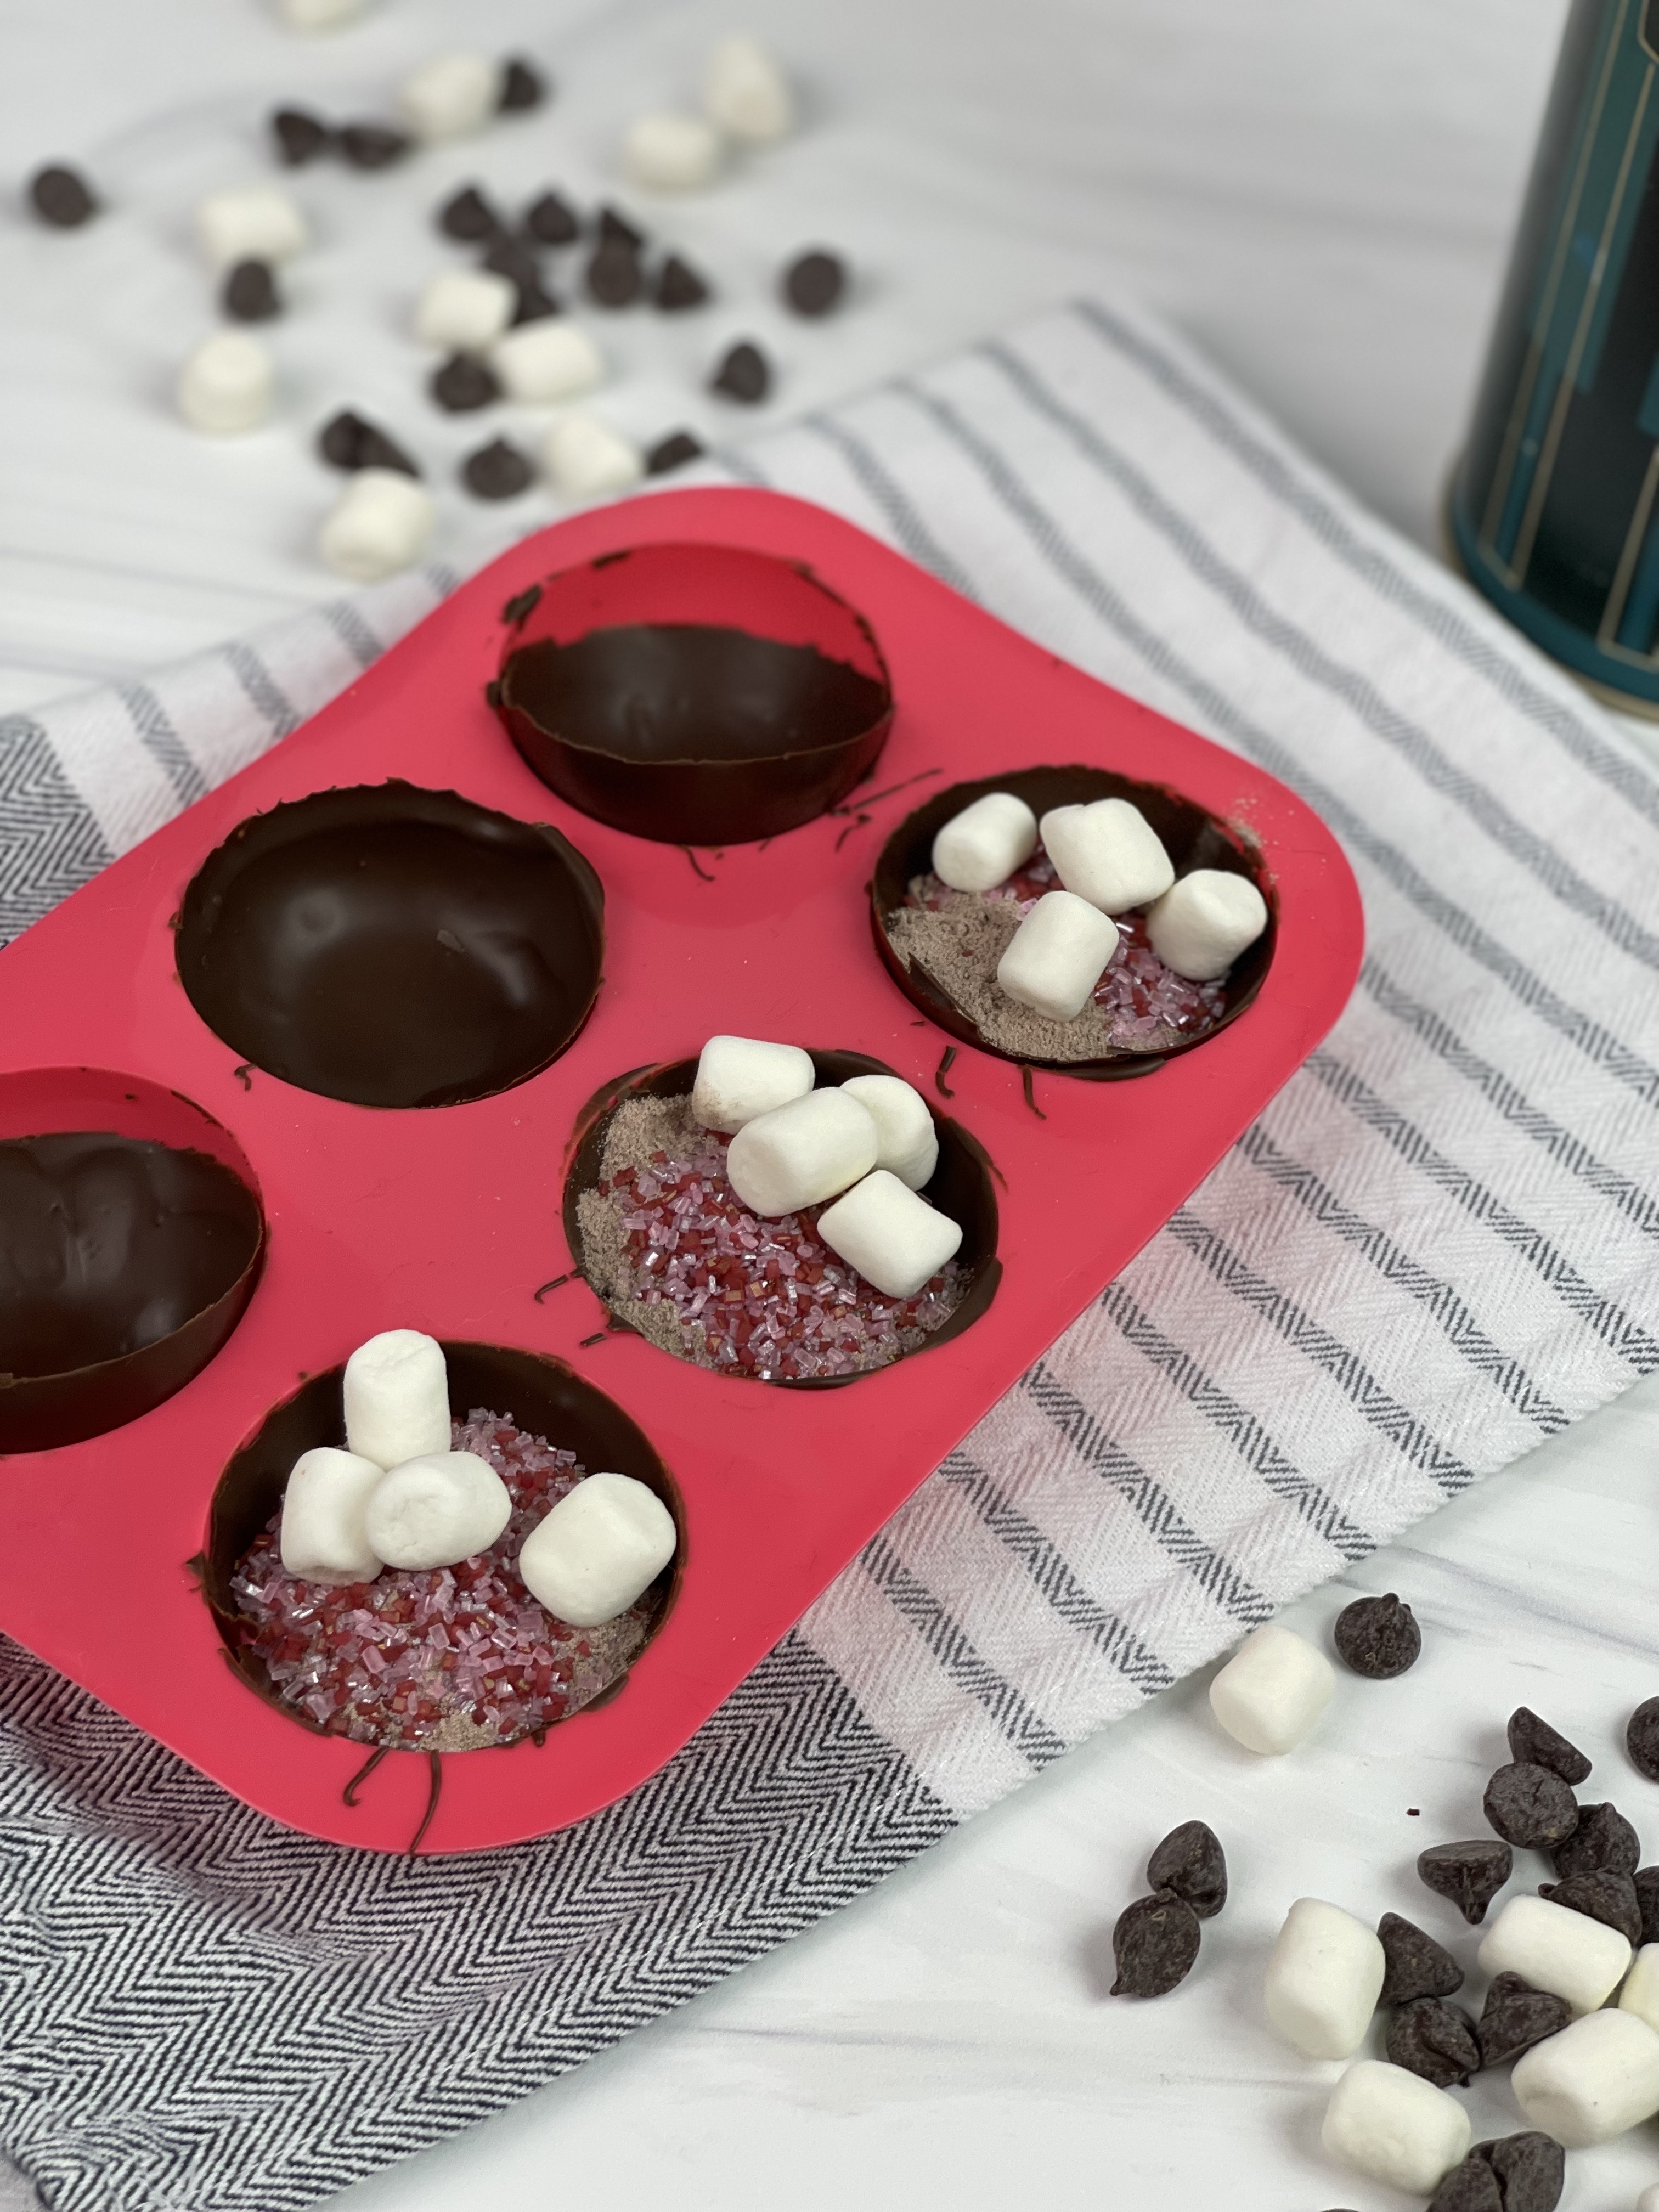 Hot Chocolate bombs will elevate your hot chocolate experience this winter.